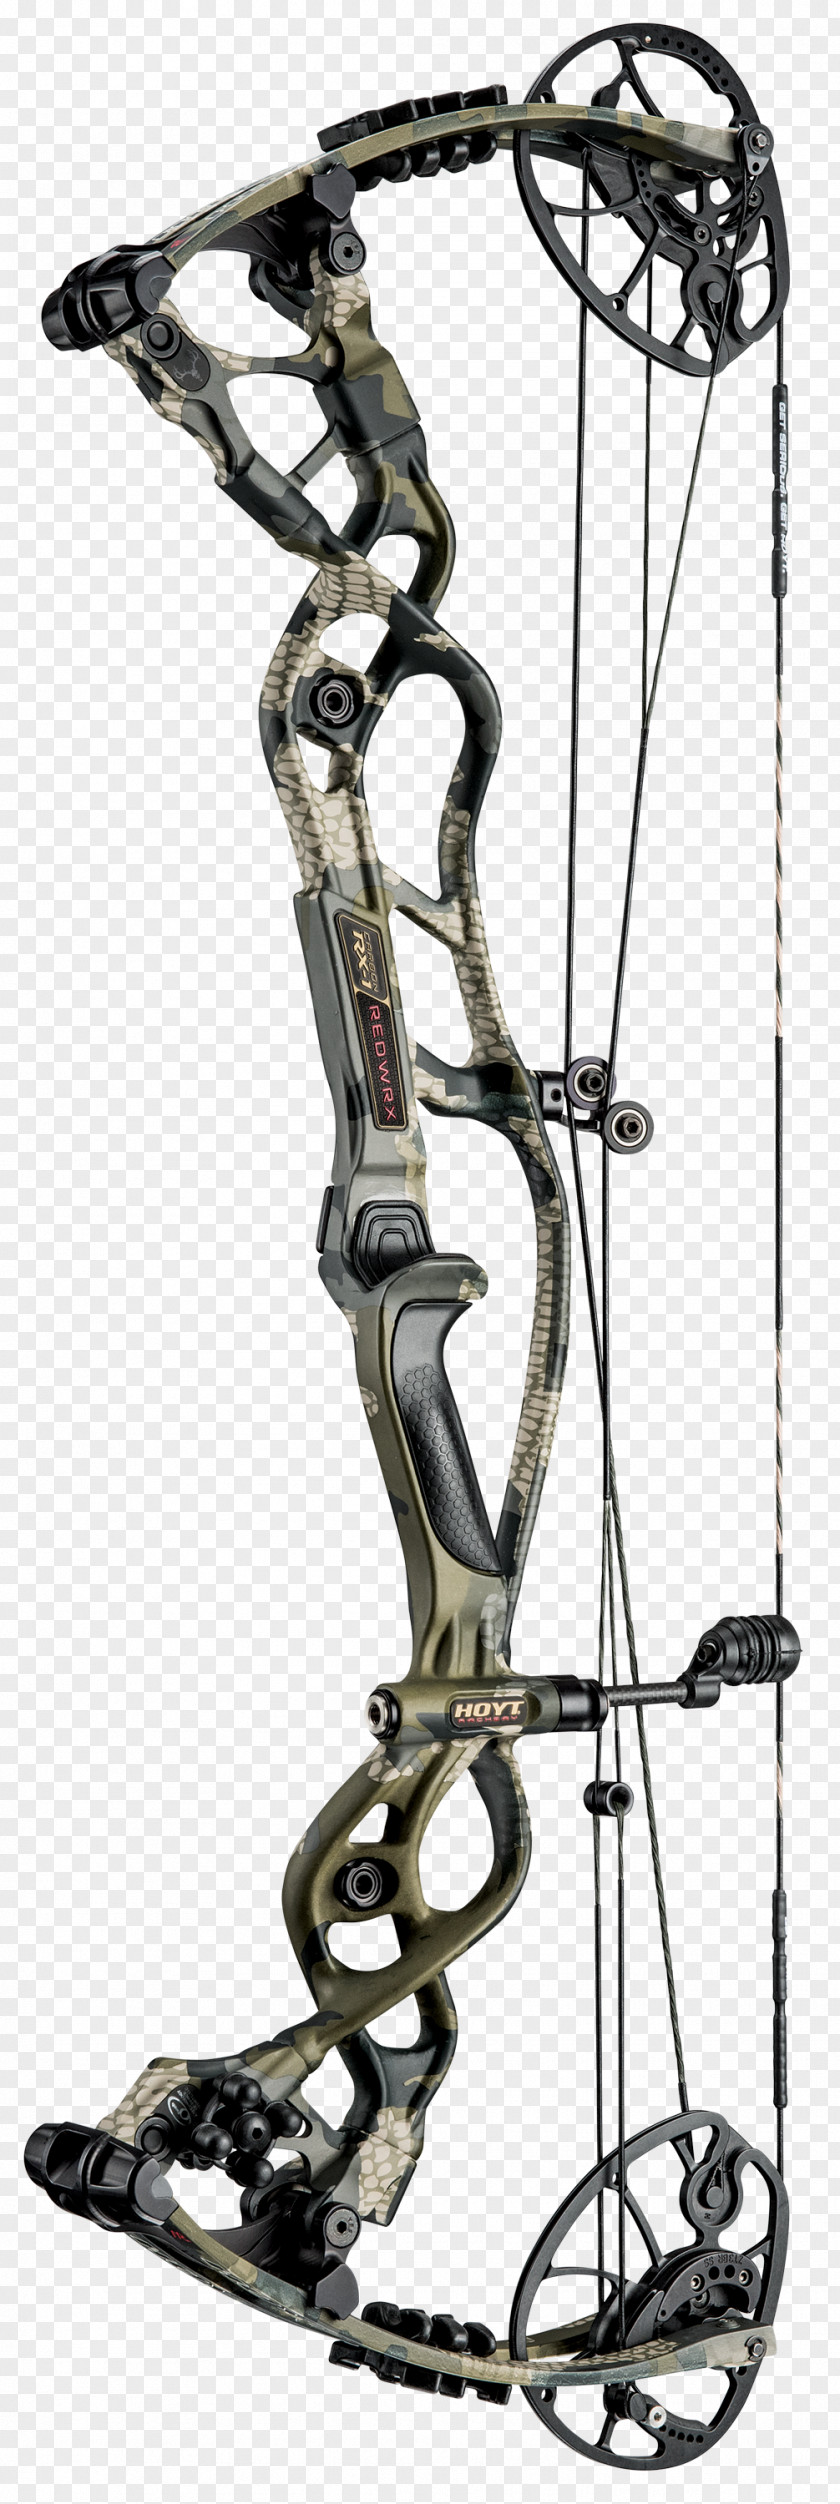 Recurve Archery Bow Slings And Arrow Compound Bows Hoyt PNG